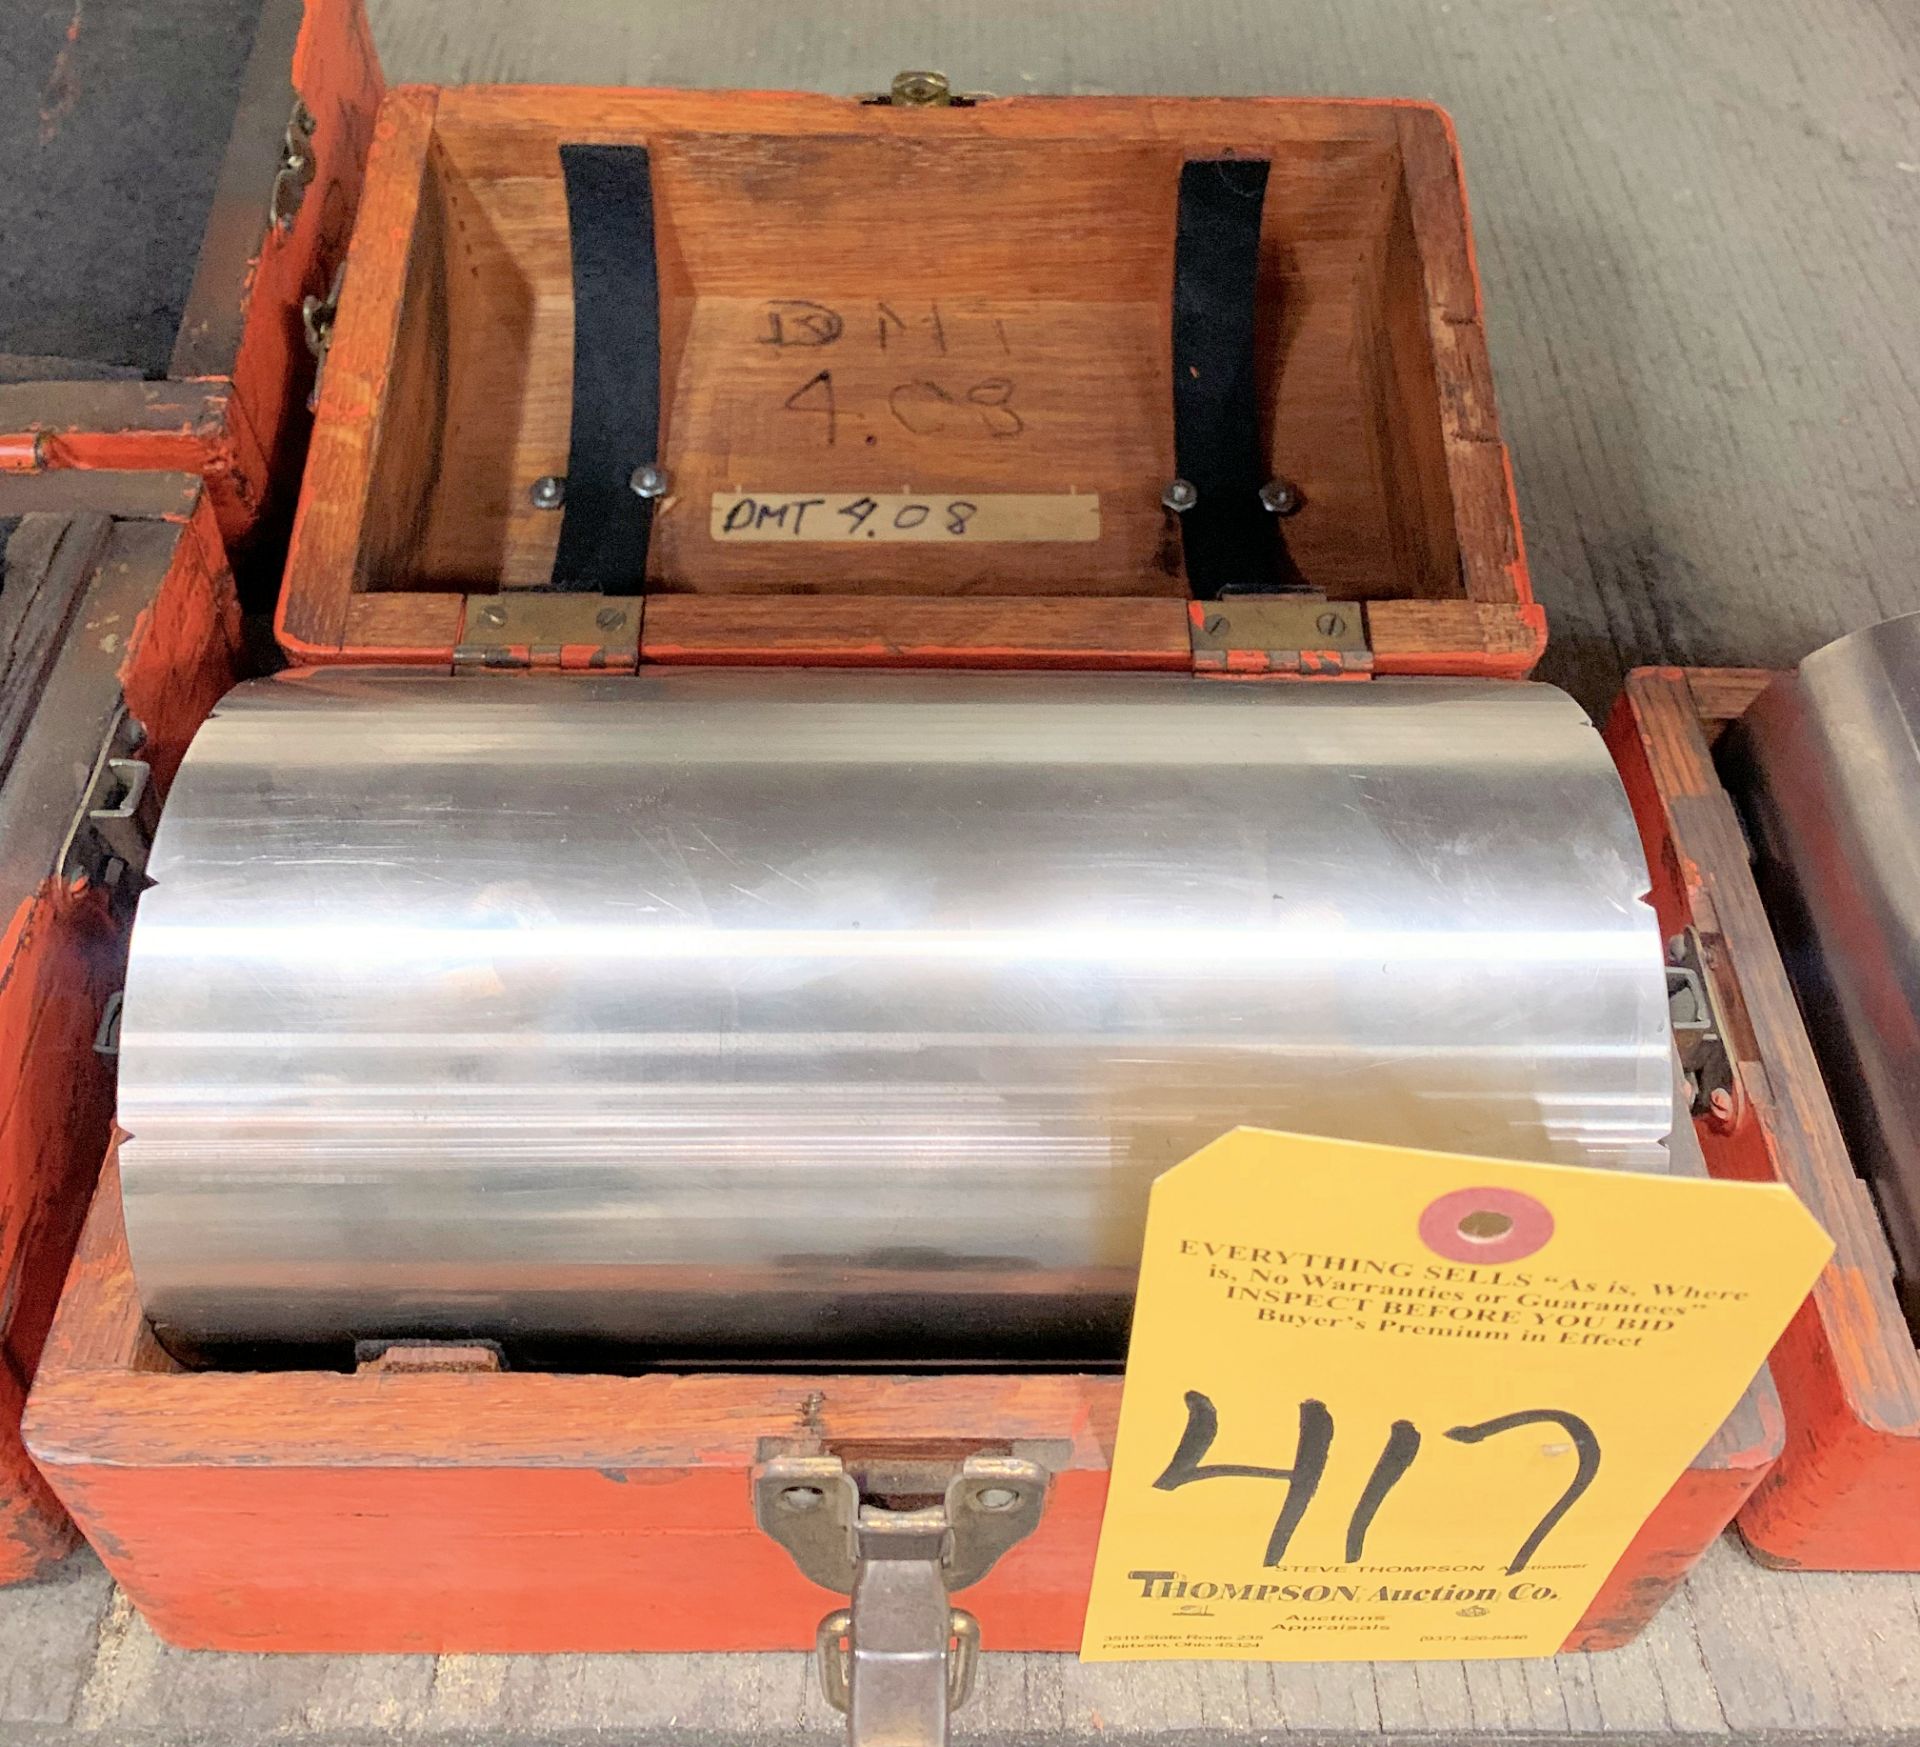 4" x 8" Cylindrical Gage with Case Under (1) Bench